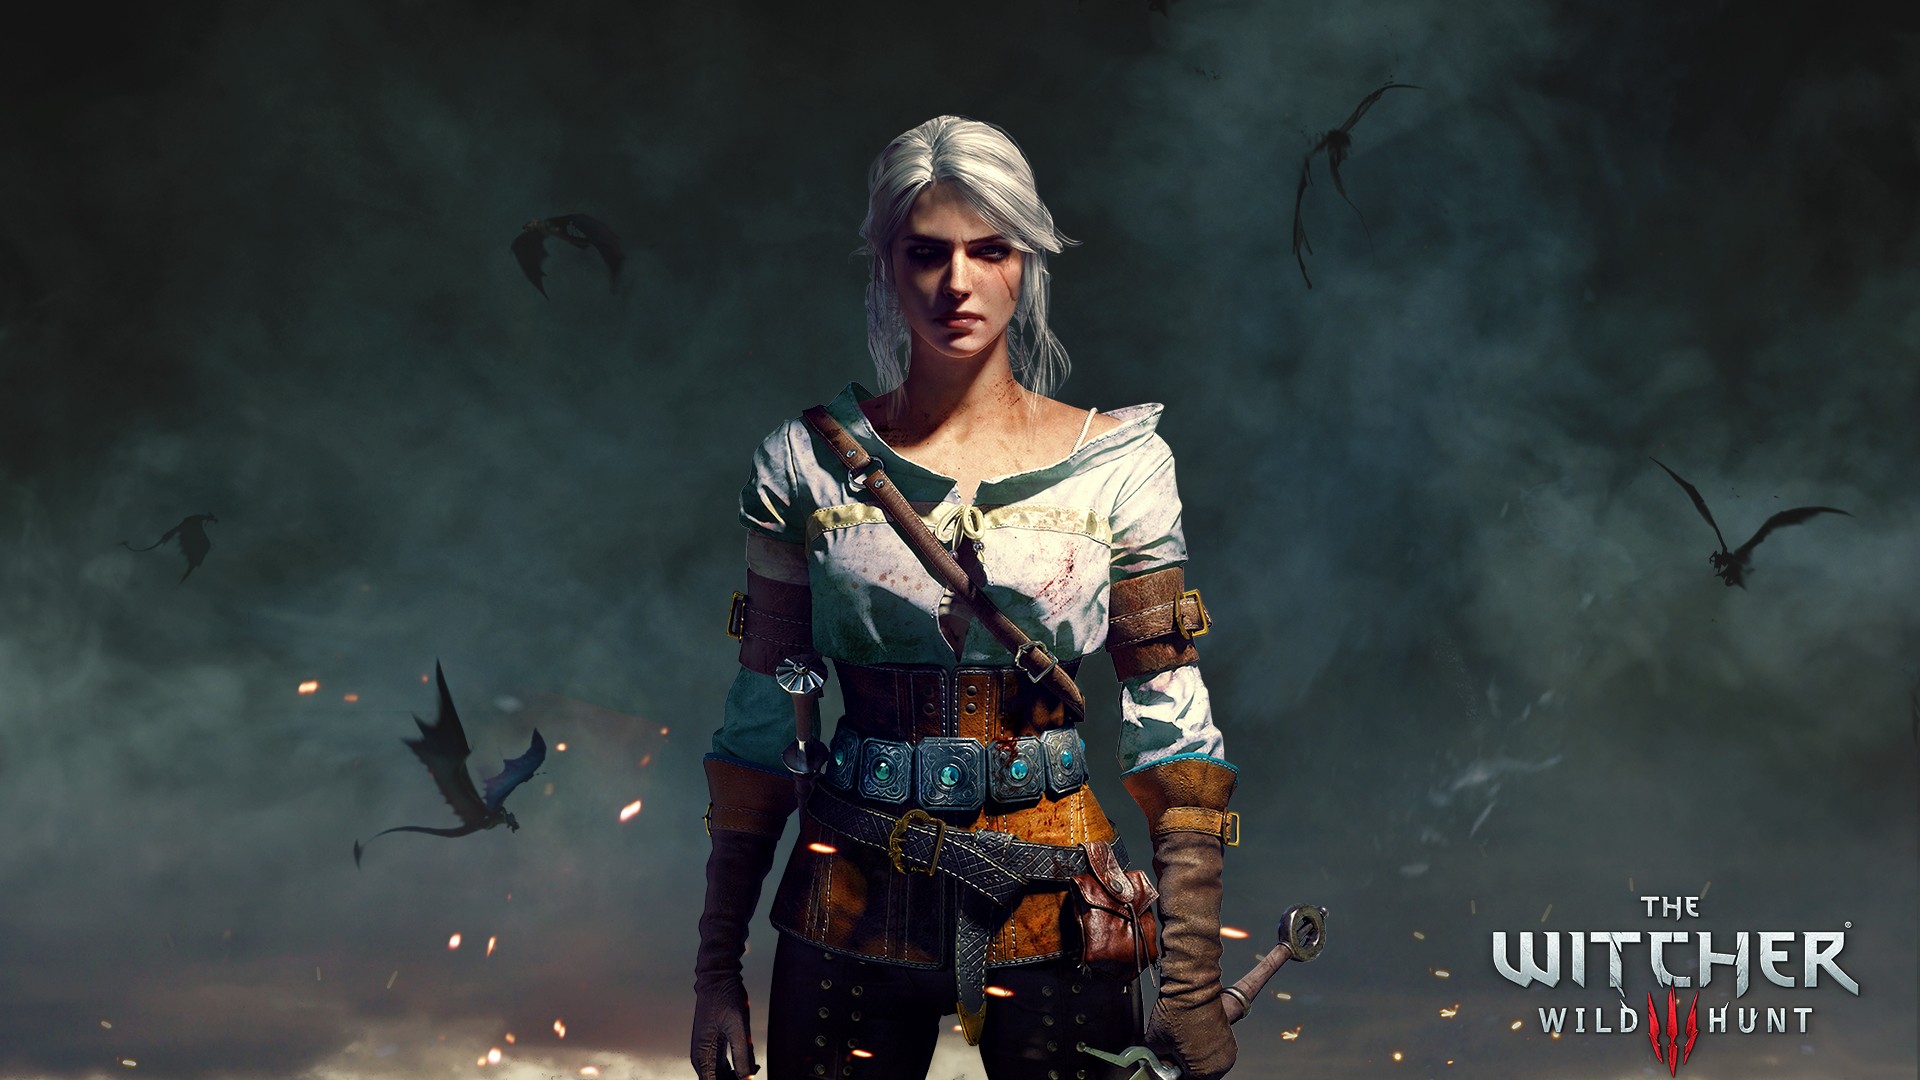 General 1920x1080 The Witcher 3: Wild Hunt Cirilla Fiona Elen Riannon video games The Witcher PC gaming fantasy art CD Projekt RED fantasy girl video game characters video game girls standing looking at viewer women